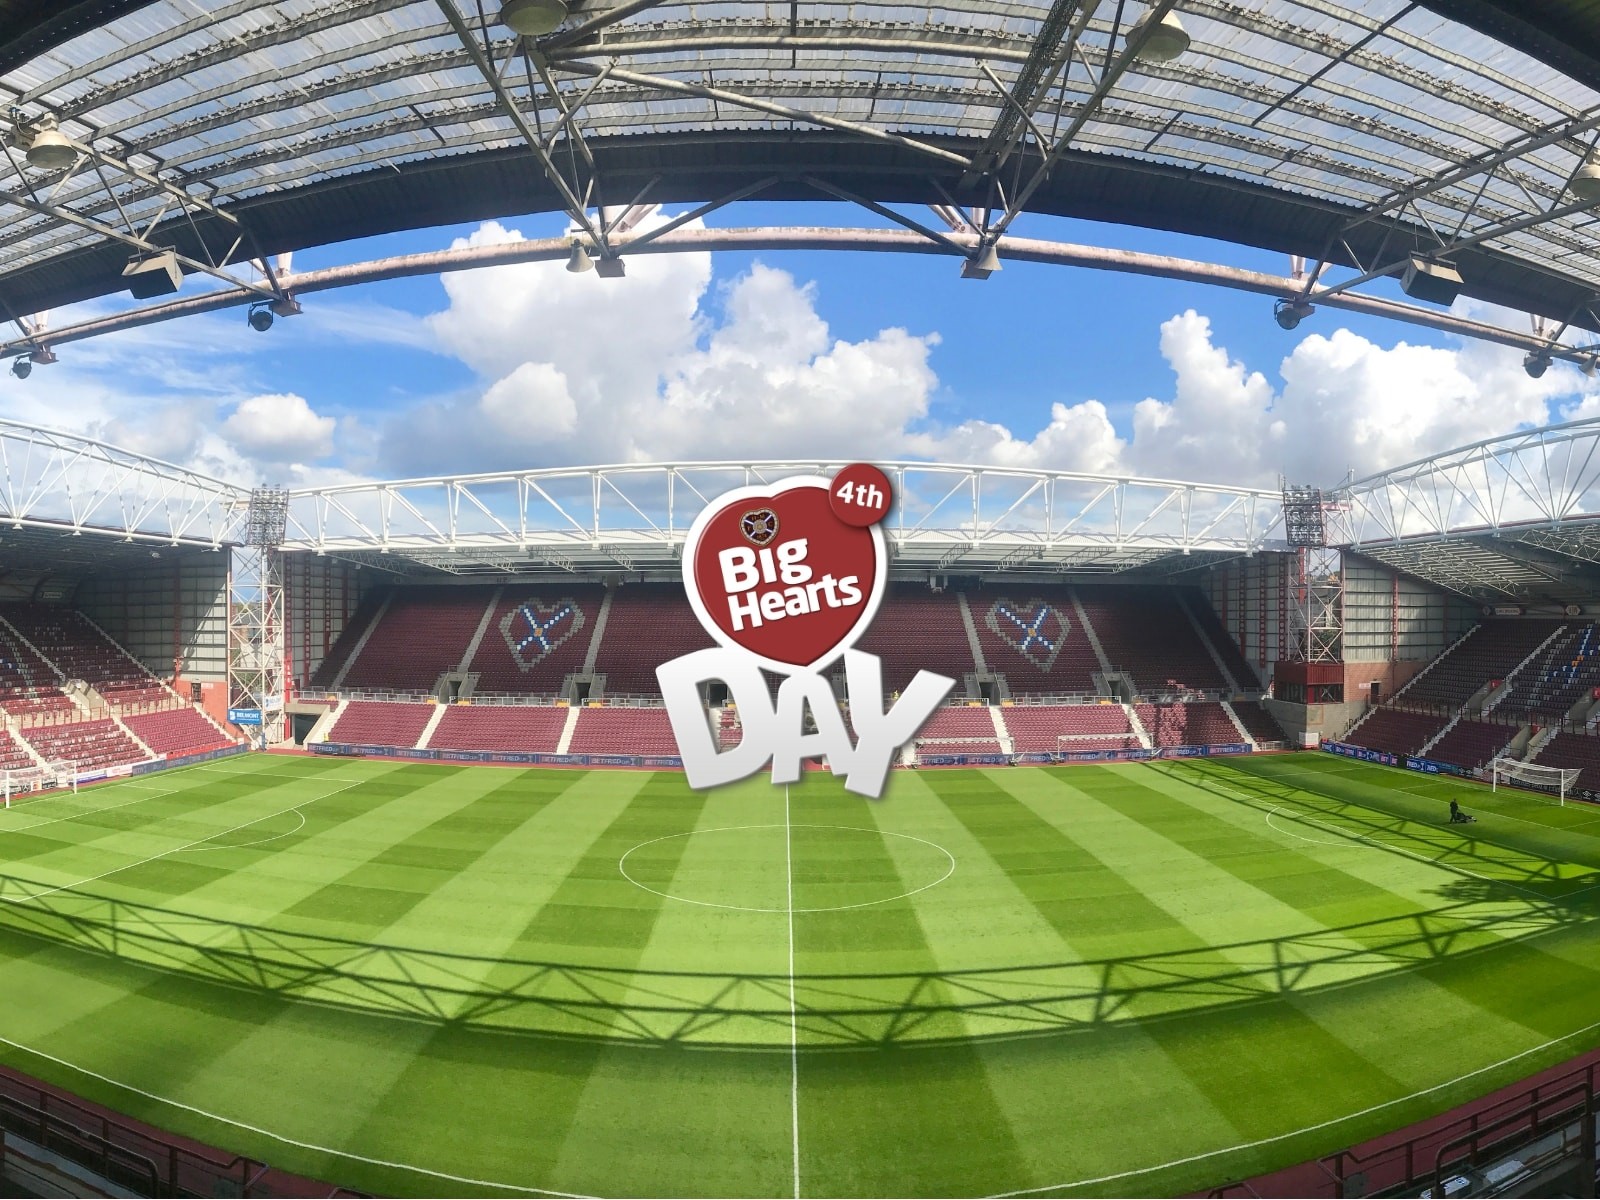  » Save the Date – 4th Big Hearts Day announced for Sat. 30th March!